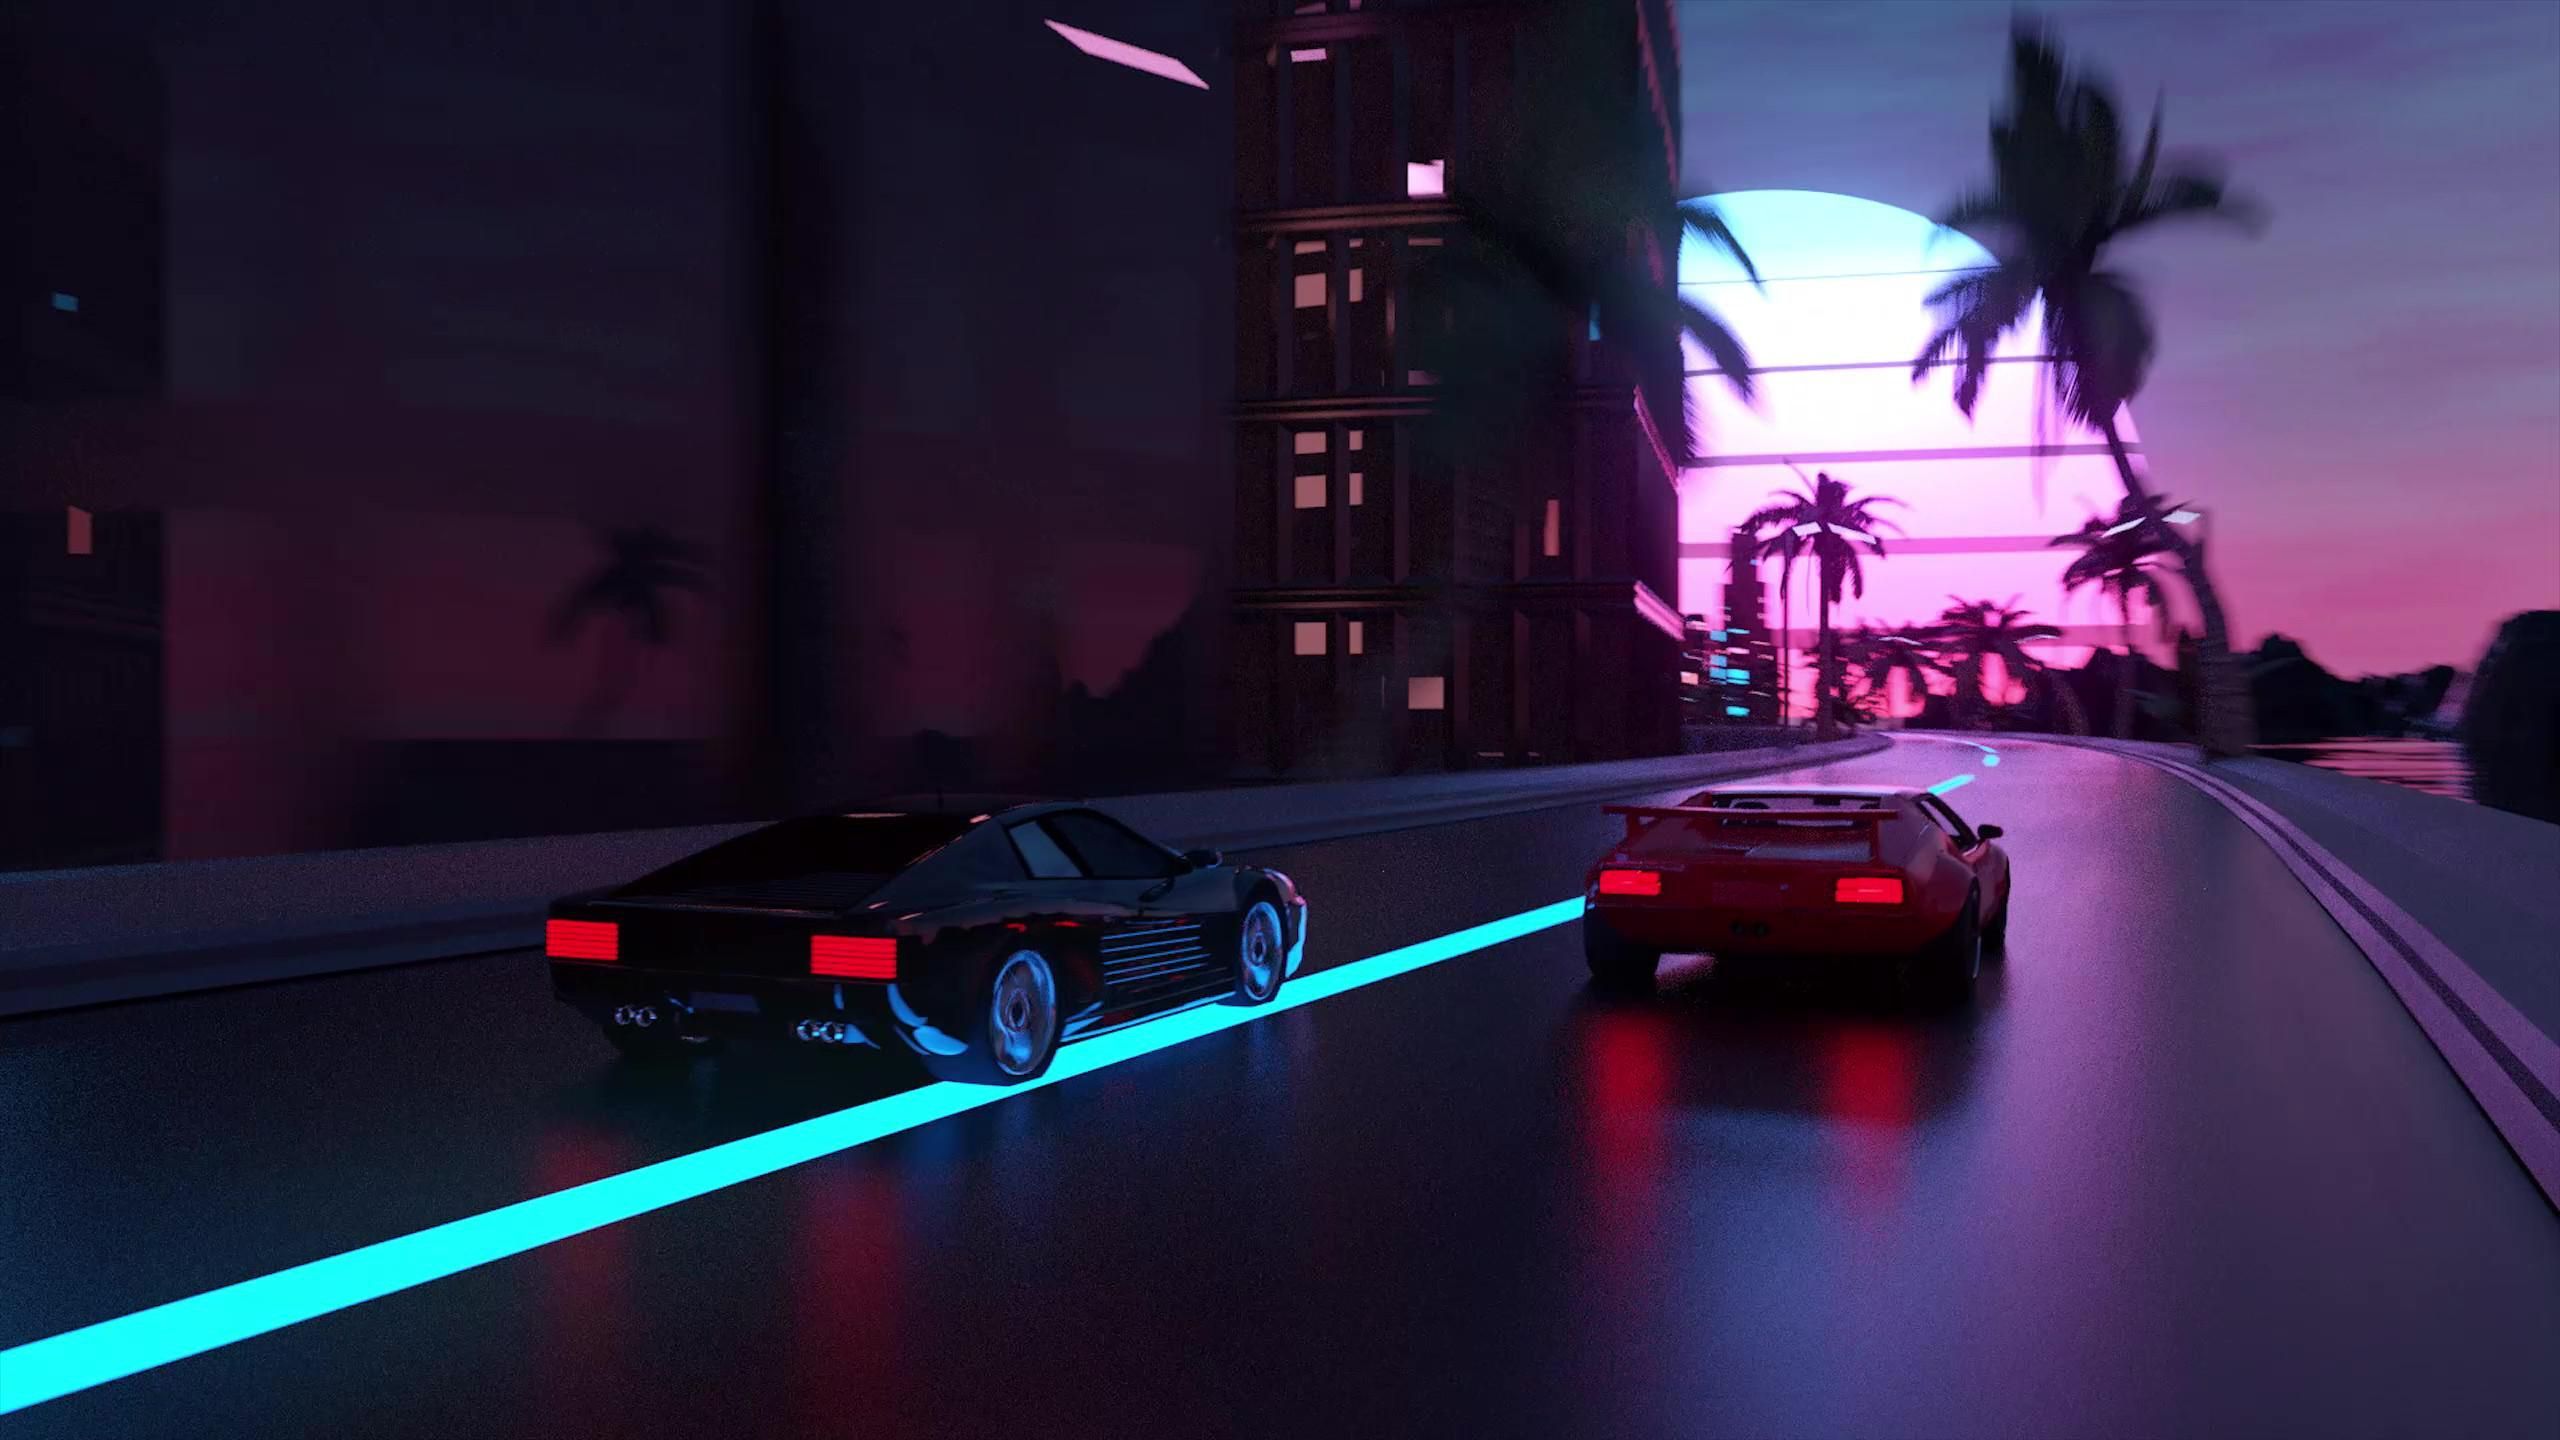 OutRun Racing Live wallpaper in 2560x1440 resolution